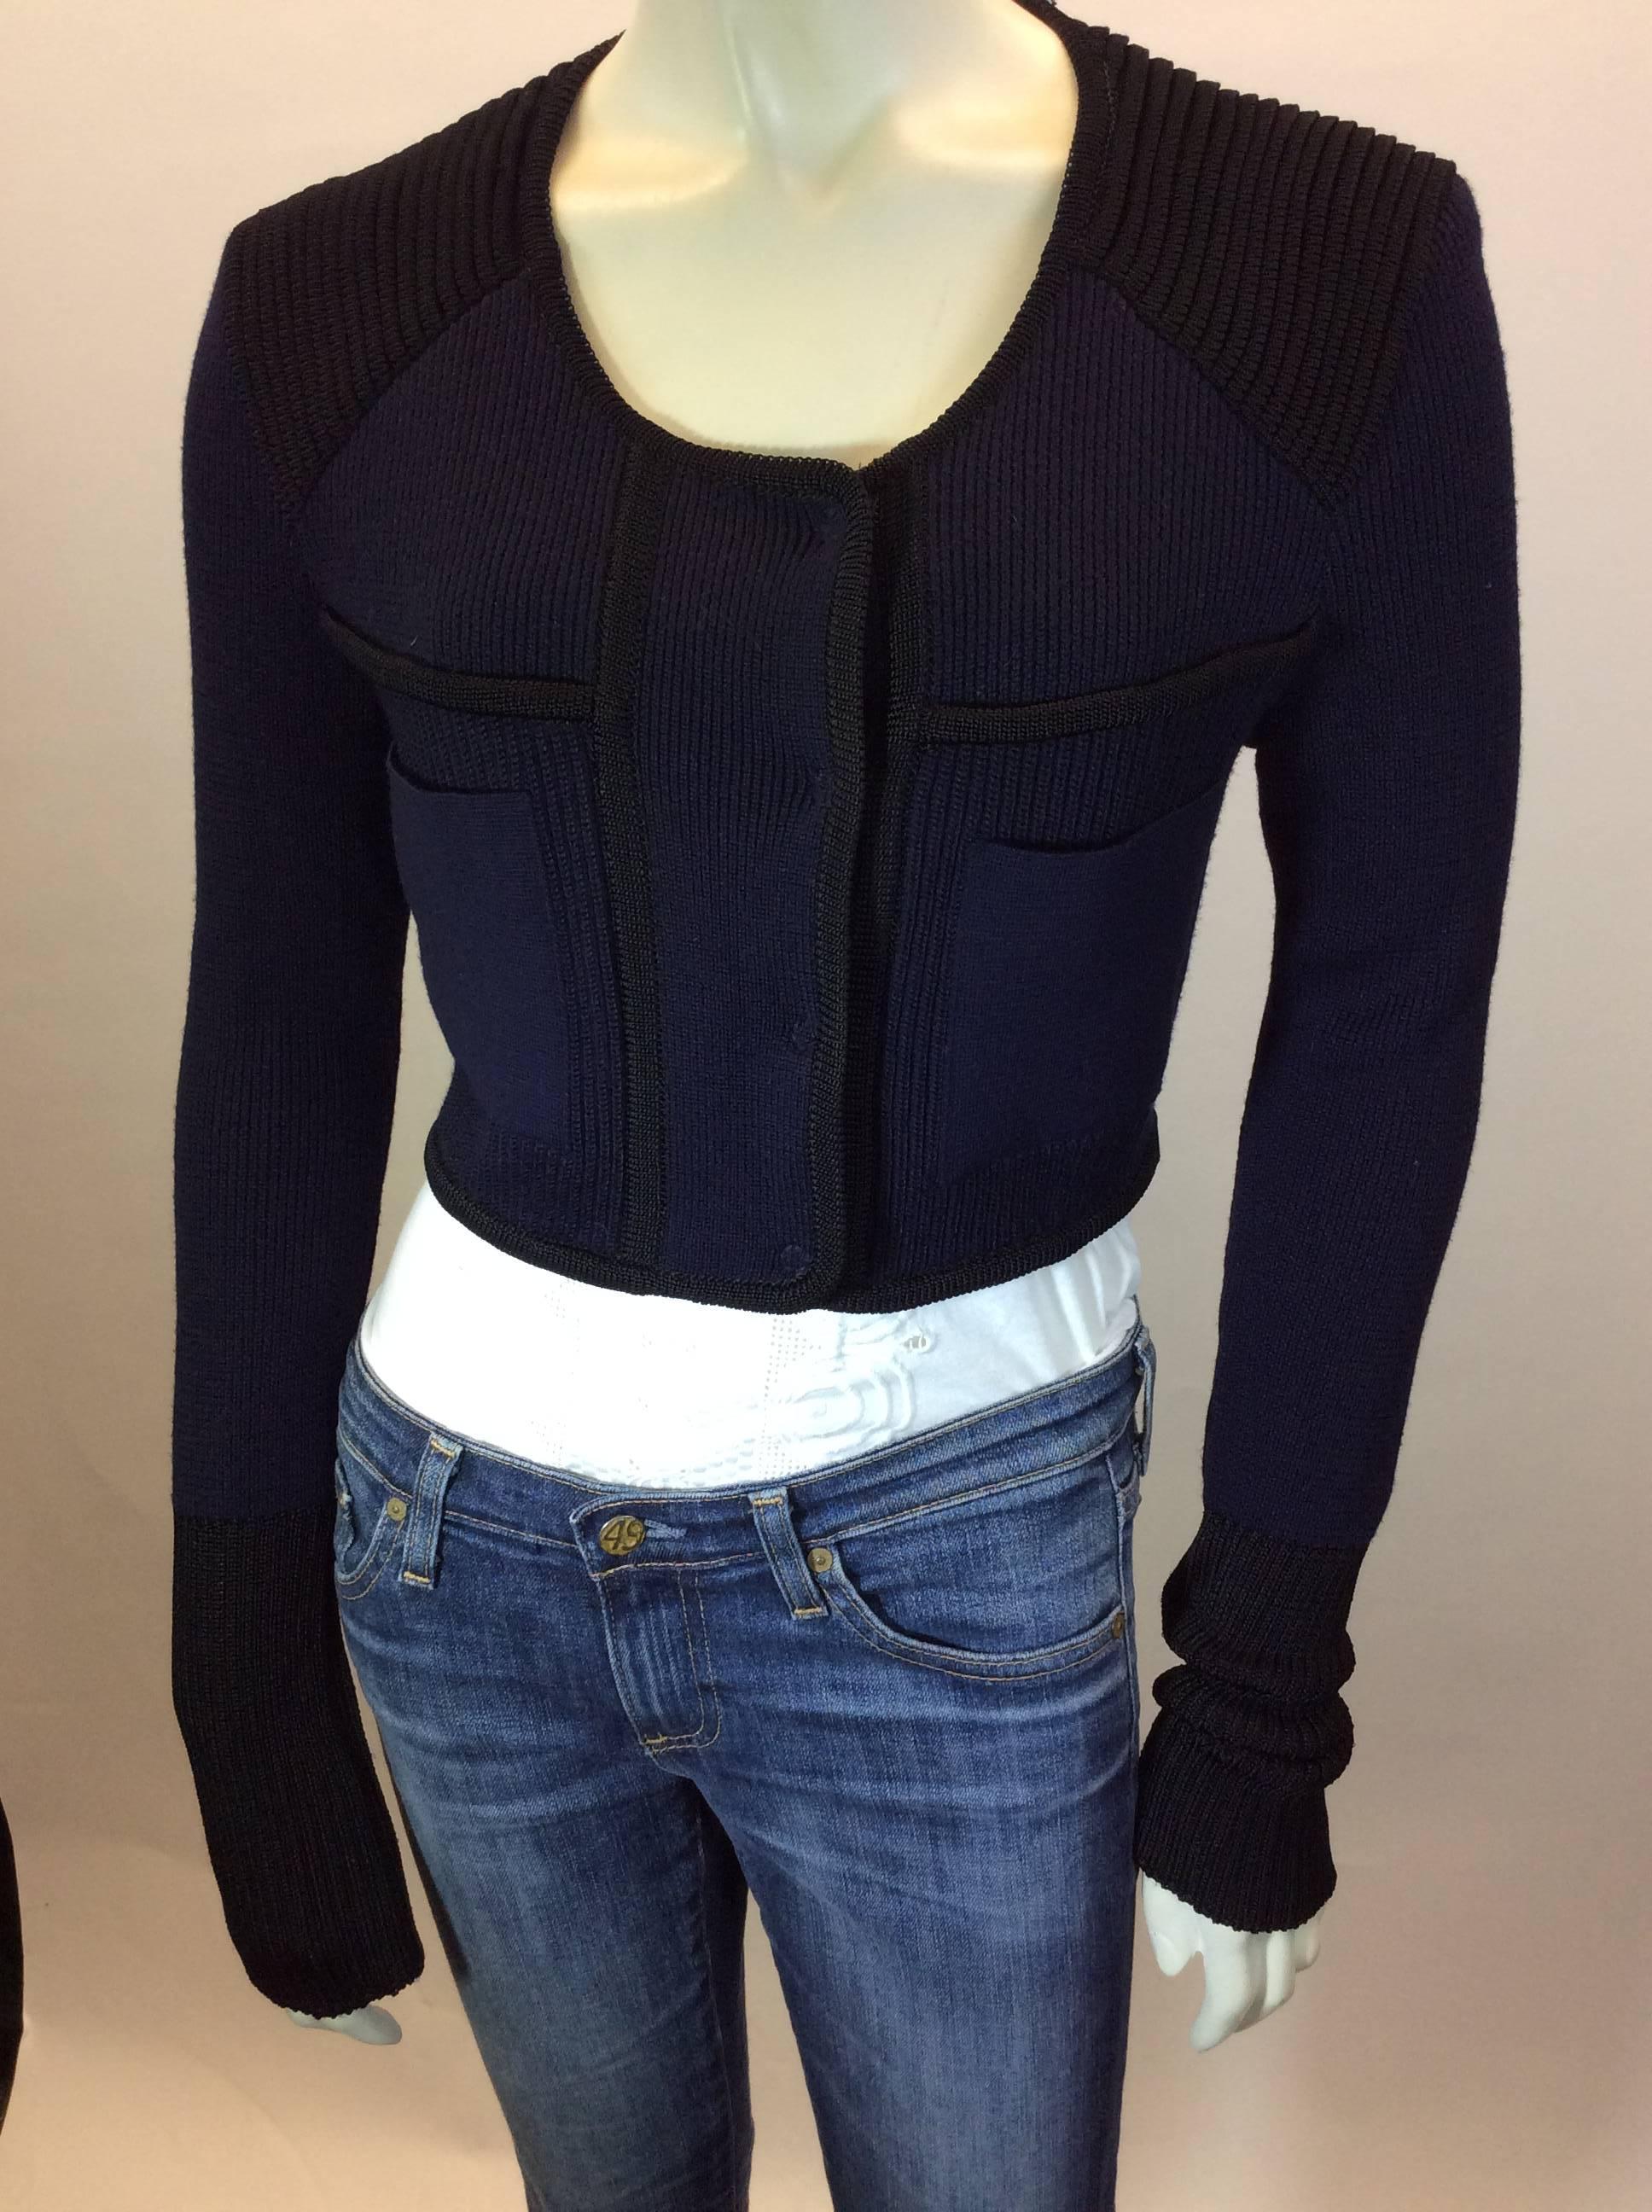 Isabel Marant Navy and Black Cardigan with Removable Piece For Sale 1